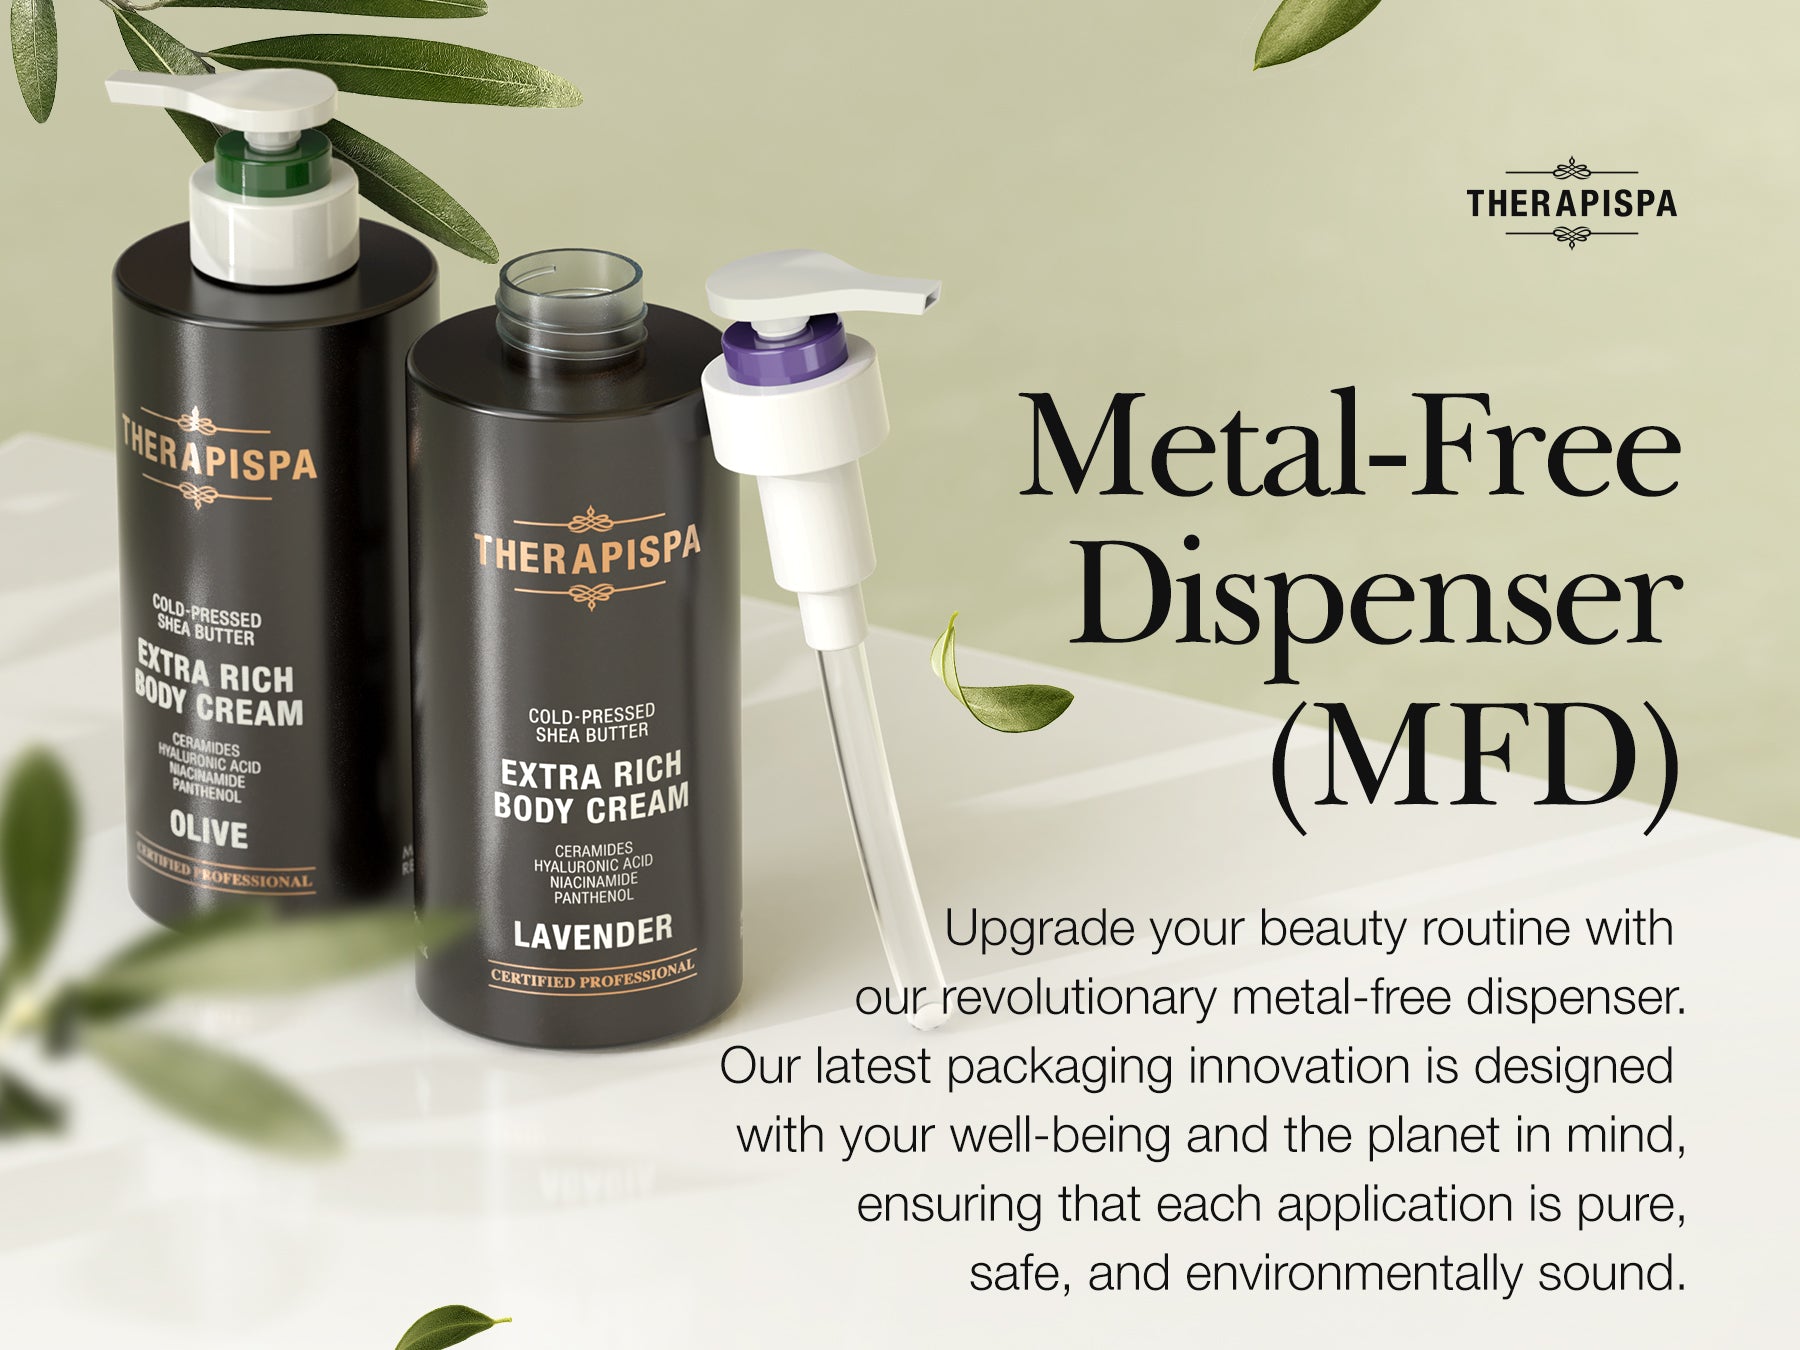 Why is Using Metal-Free Dispenser Important in Personal Beauty Care Product?